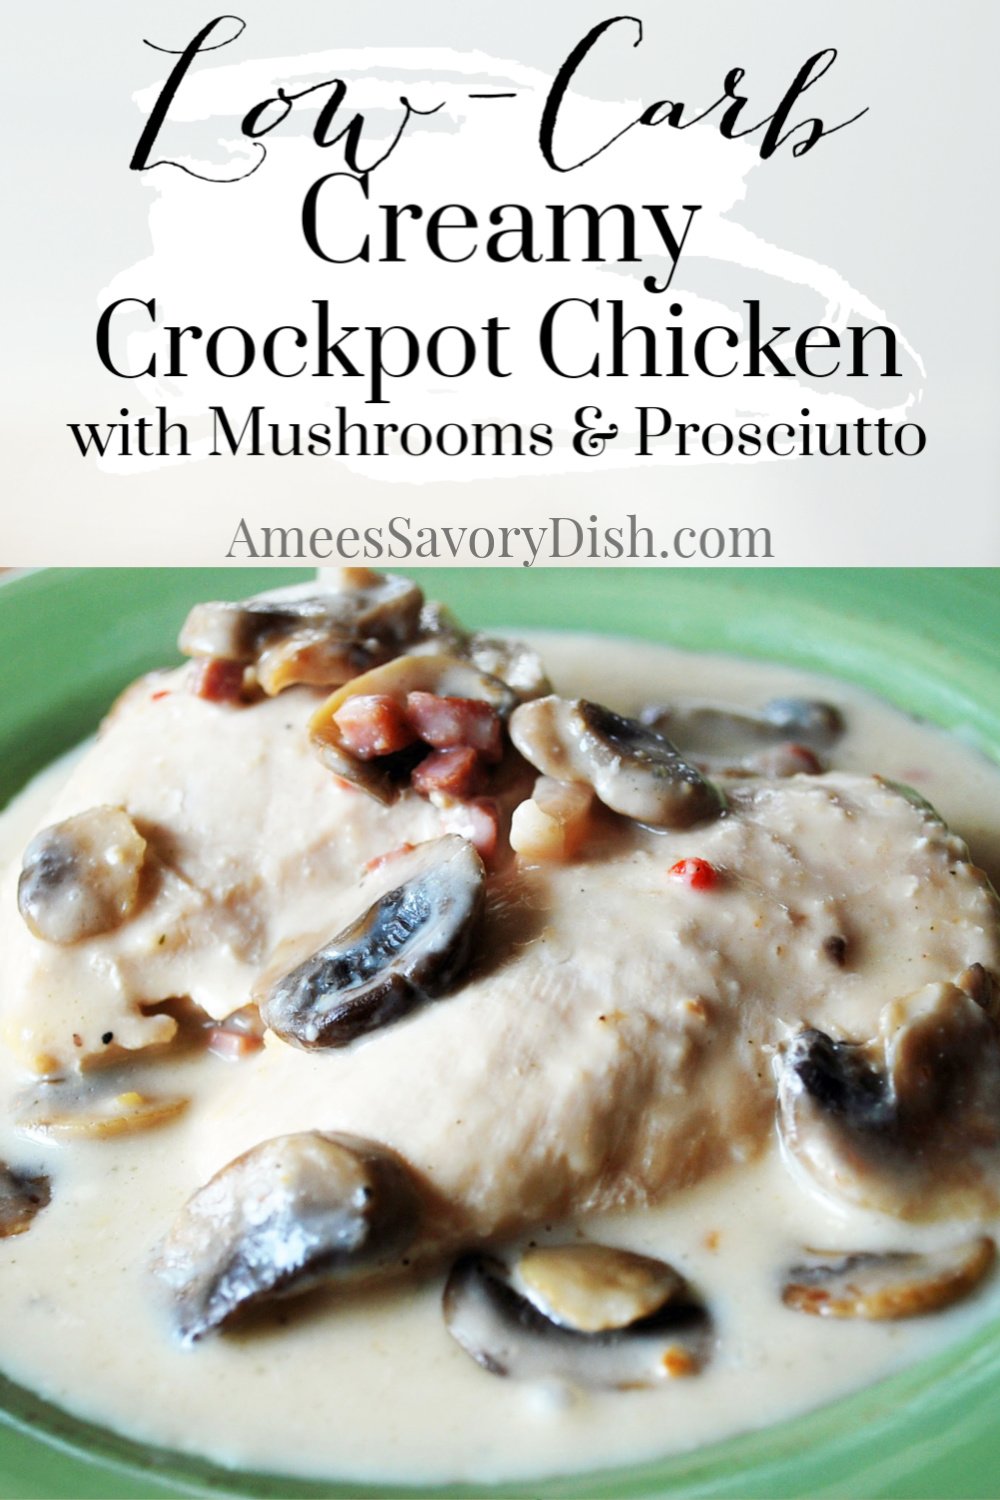 This easy keto-friendly recipe for Crockpot chicken makes meal planning a breeze made with boneless chicken breasts, prosciutto ham, & mushrooms. via @Ameessavorydish